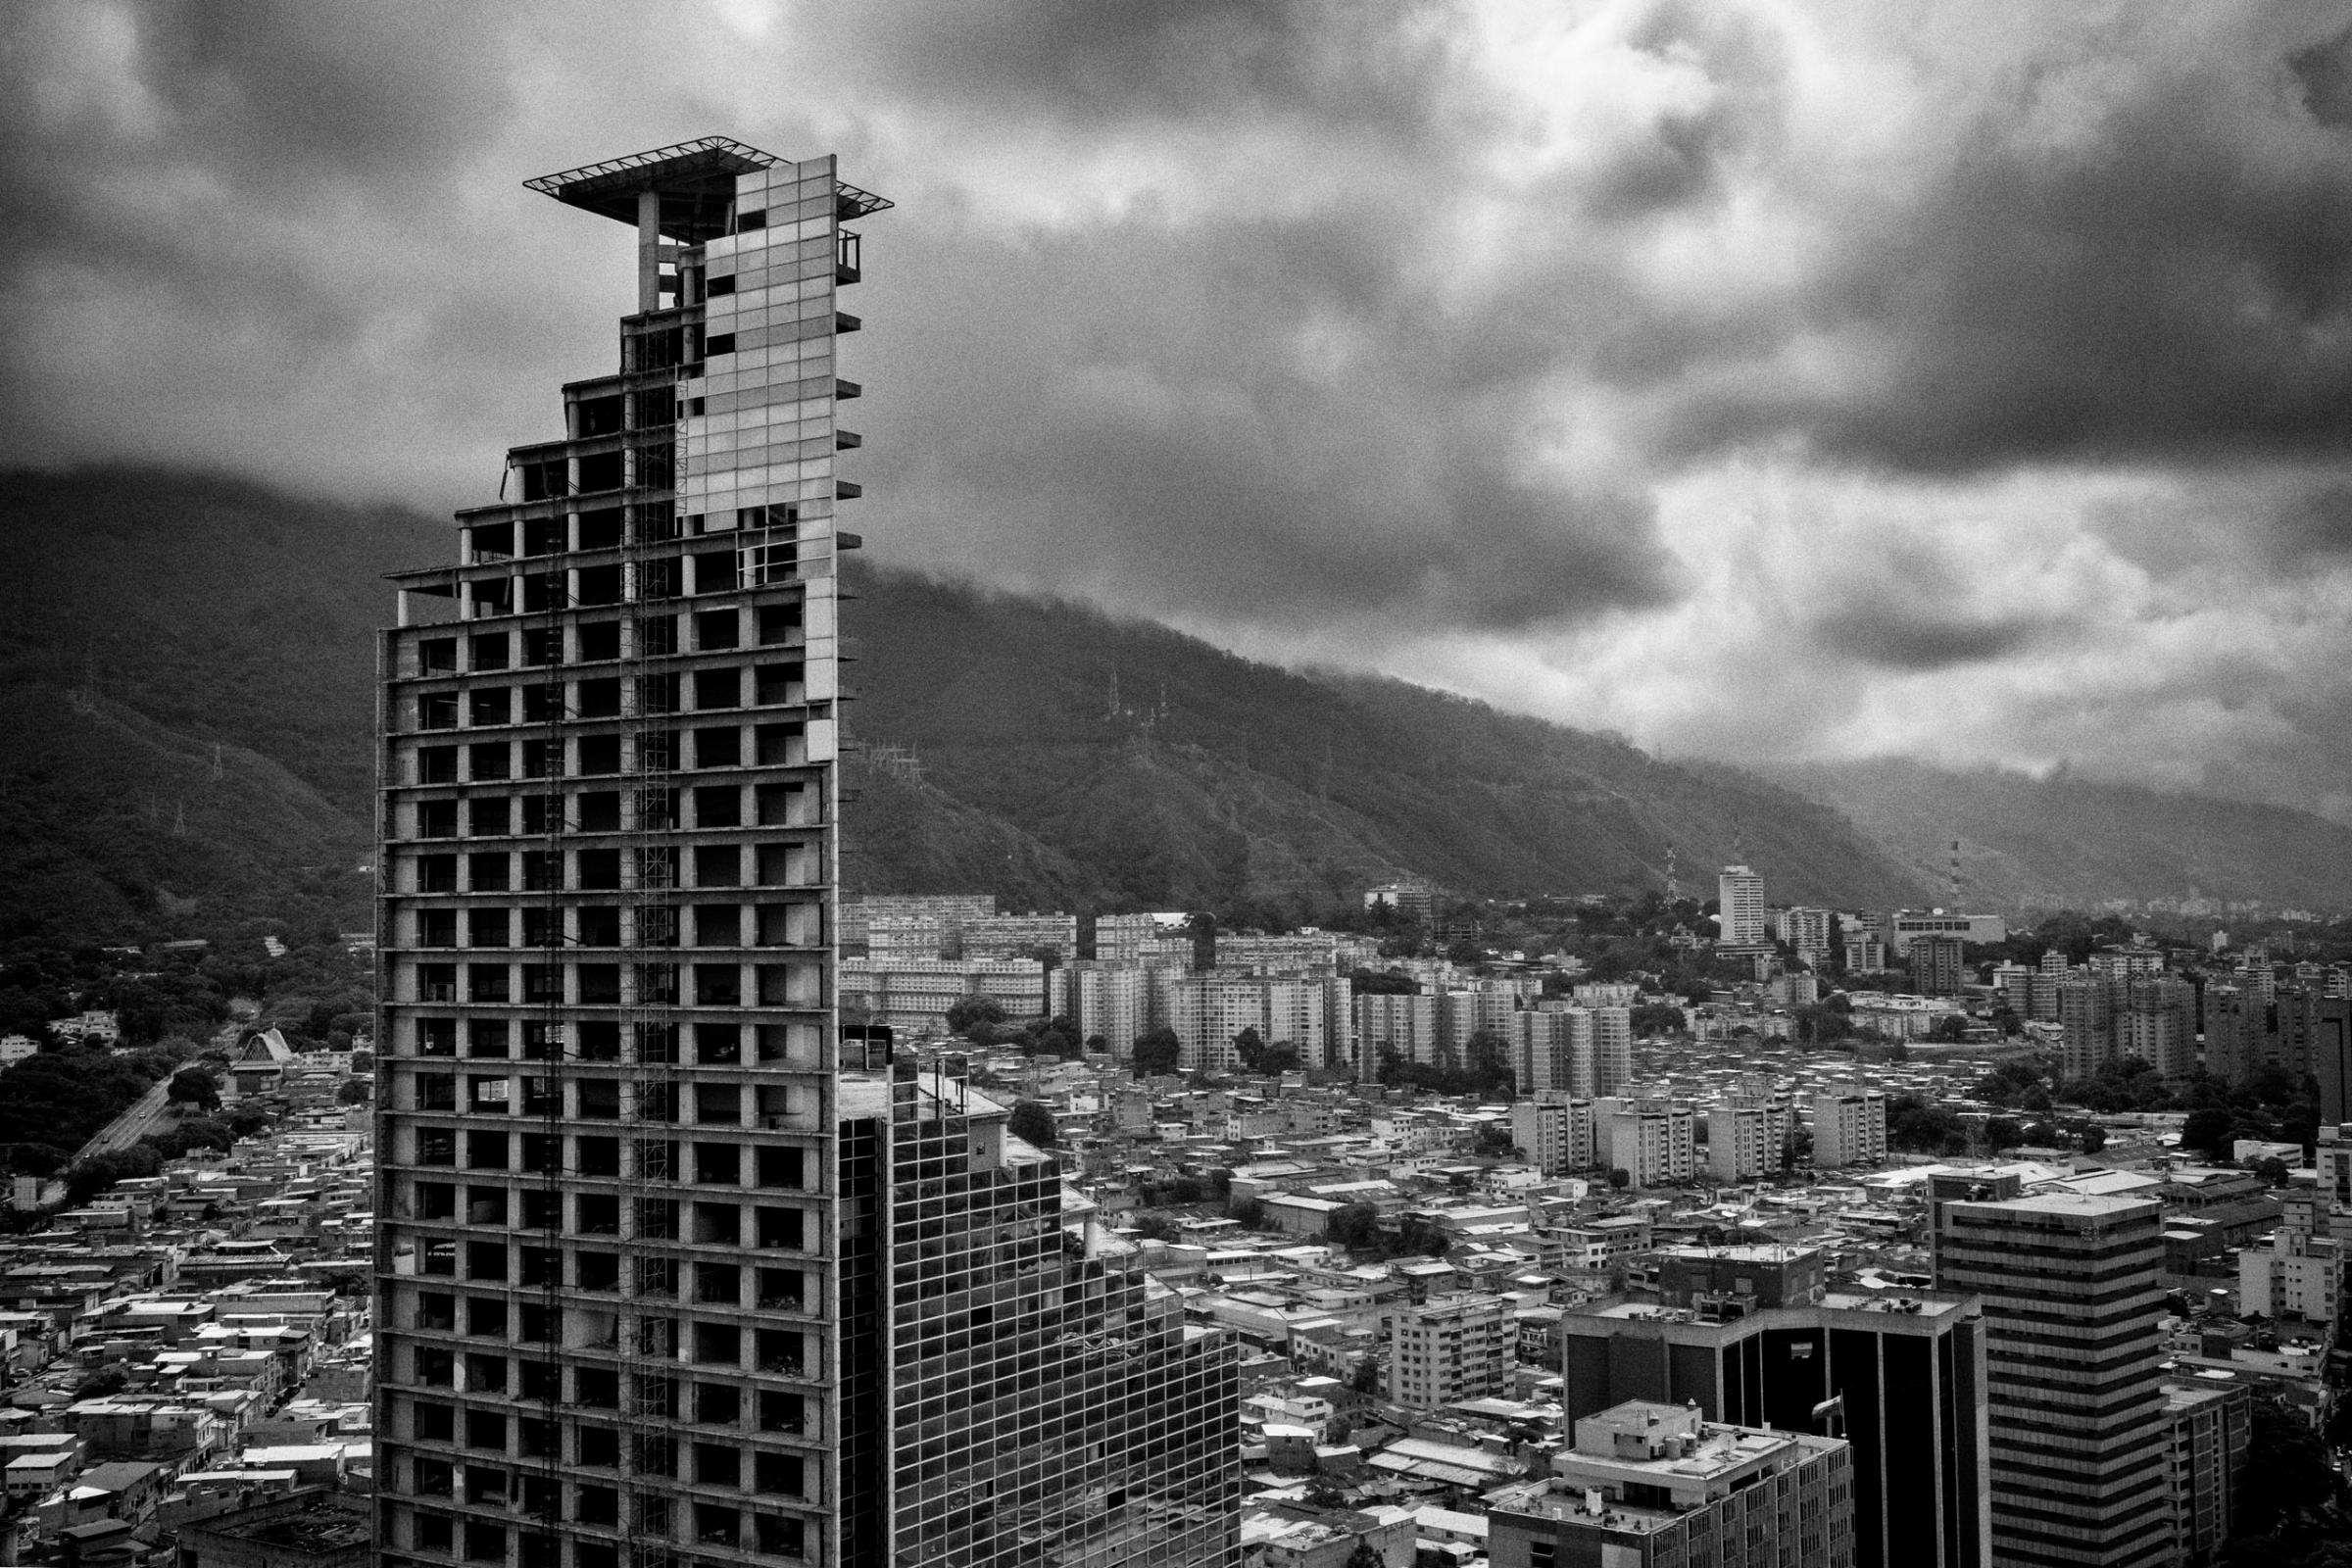 The Tower of David in Caracas was the worlds largest vertical slum, until its inhabitants were evicted. Insecurity and violence plagues the neighboring district around the tower, July 2015